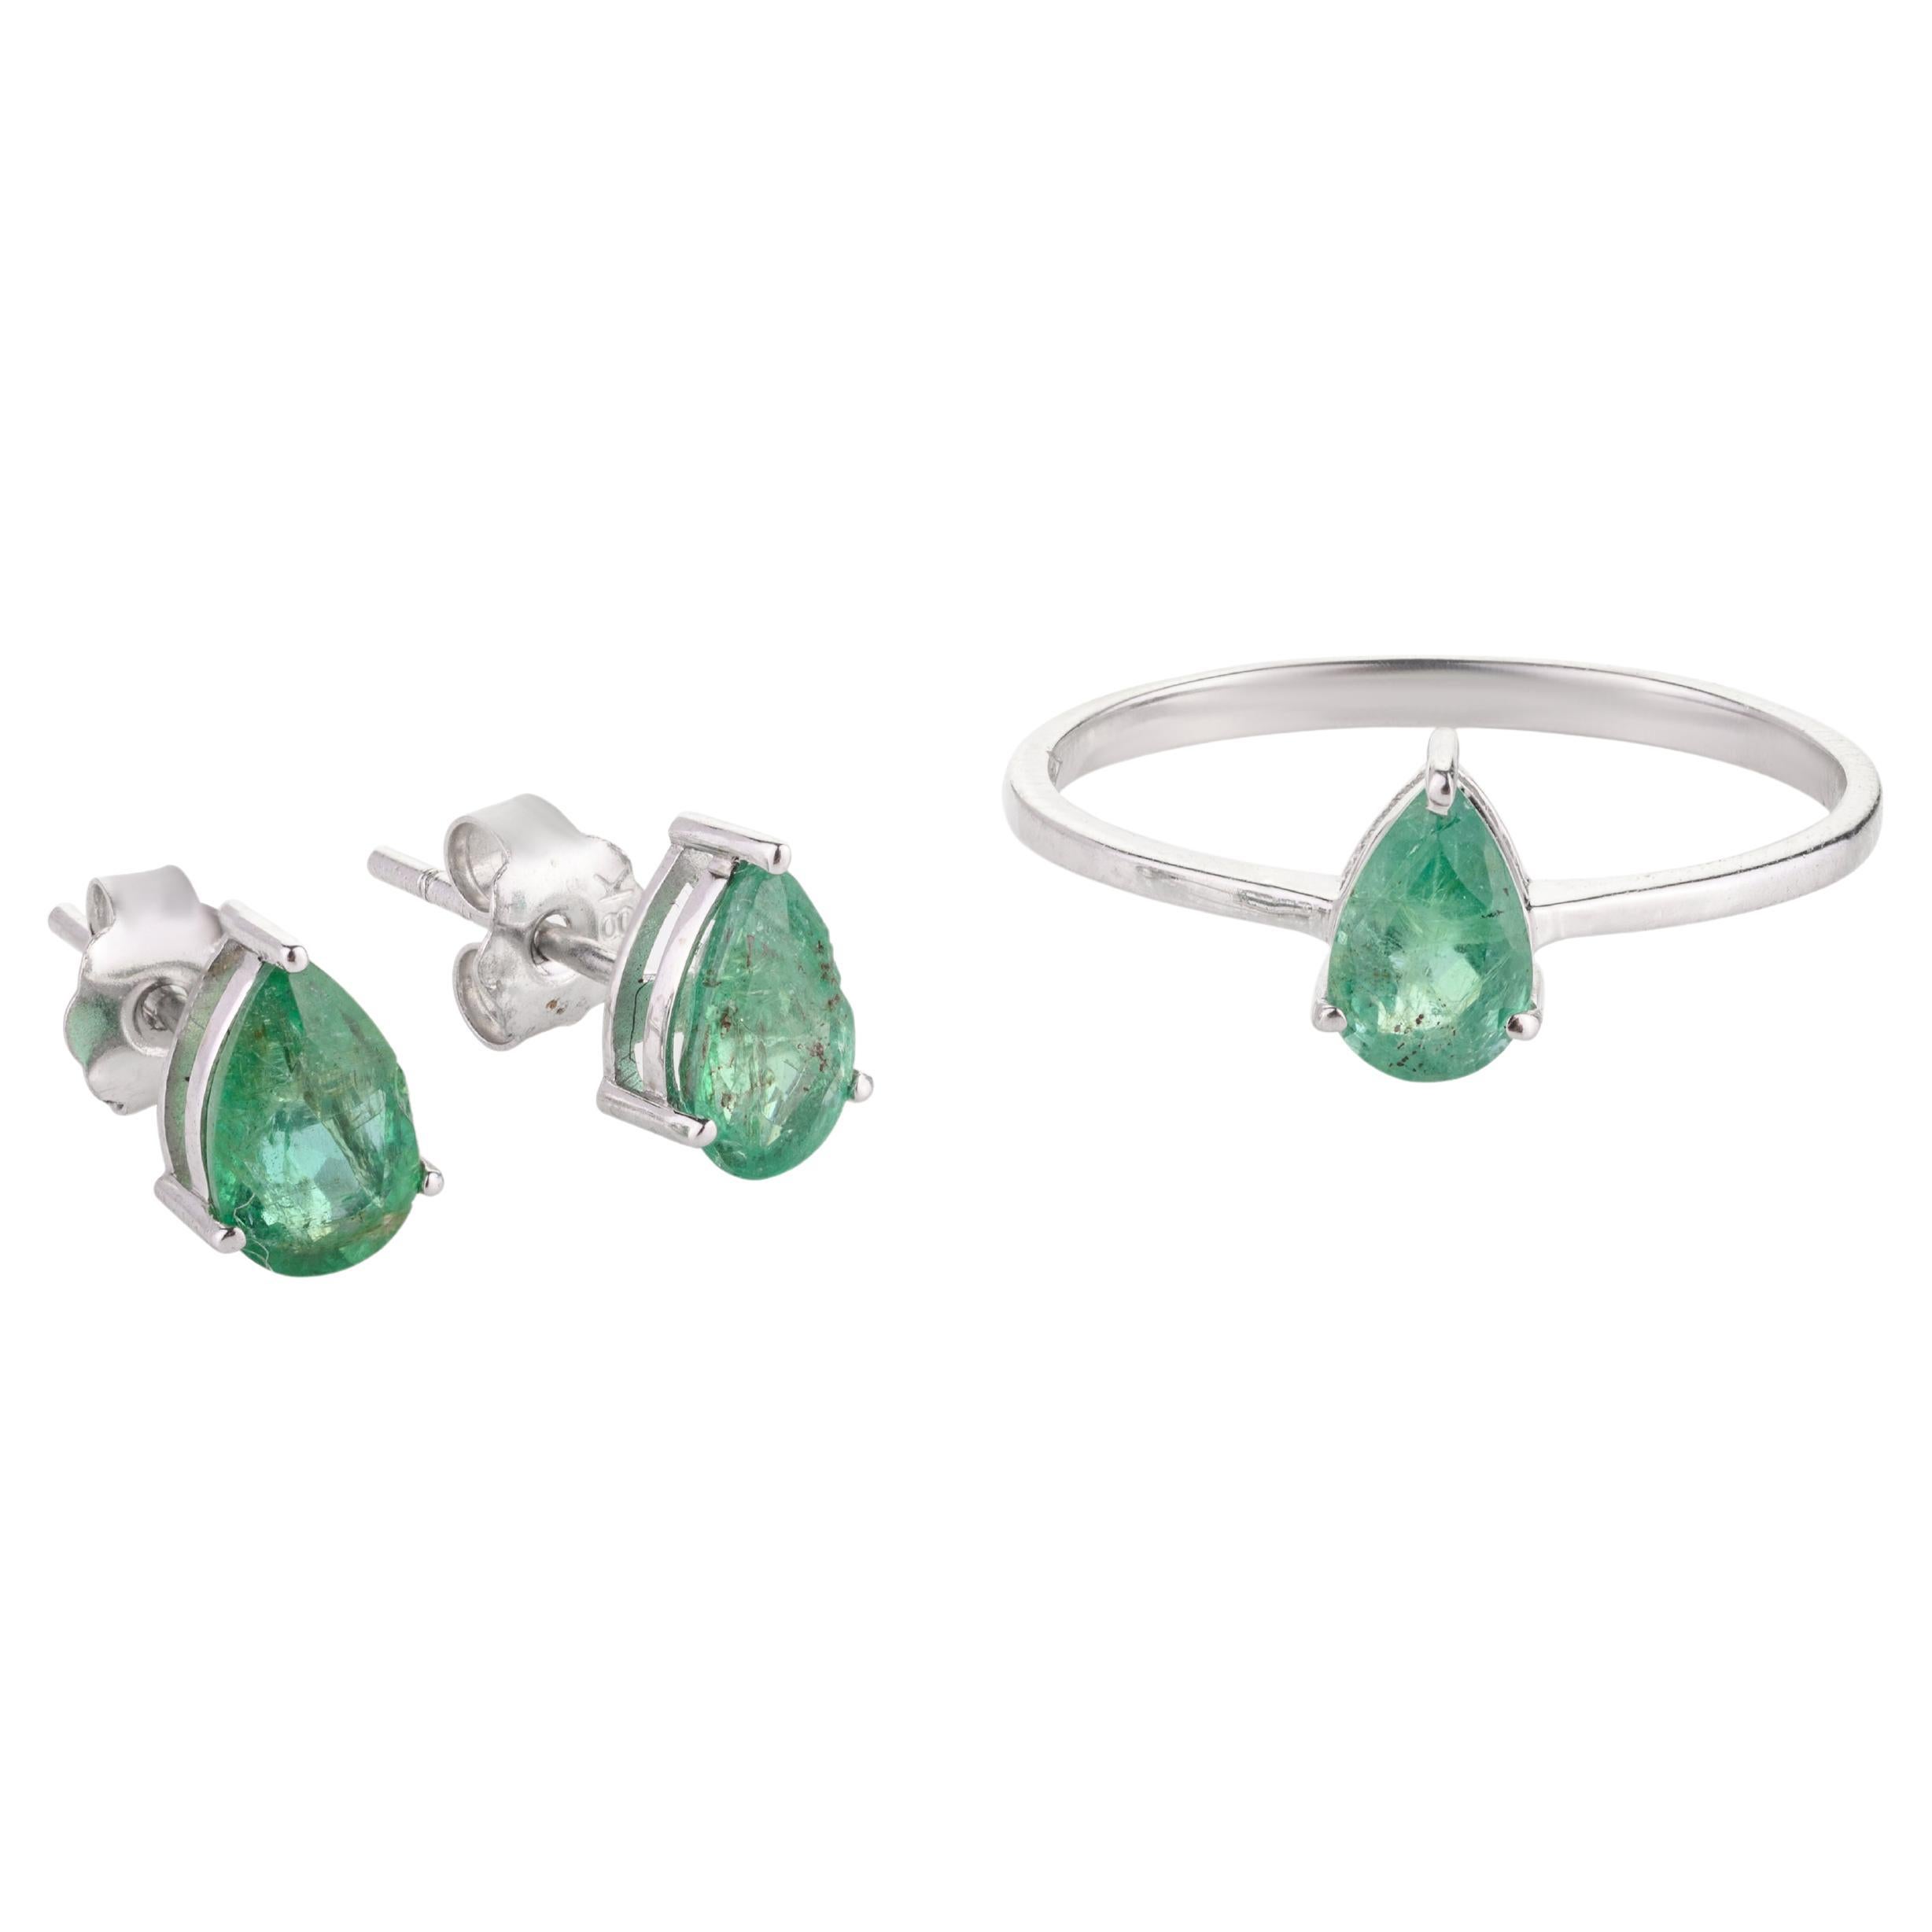 For Sale:  Dainty Emerald Ring and Earrings Jewelry Set Made in 18k Solid White Gold